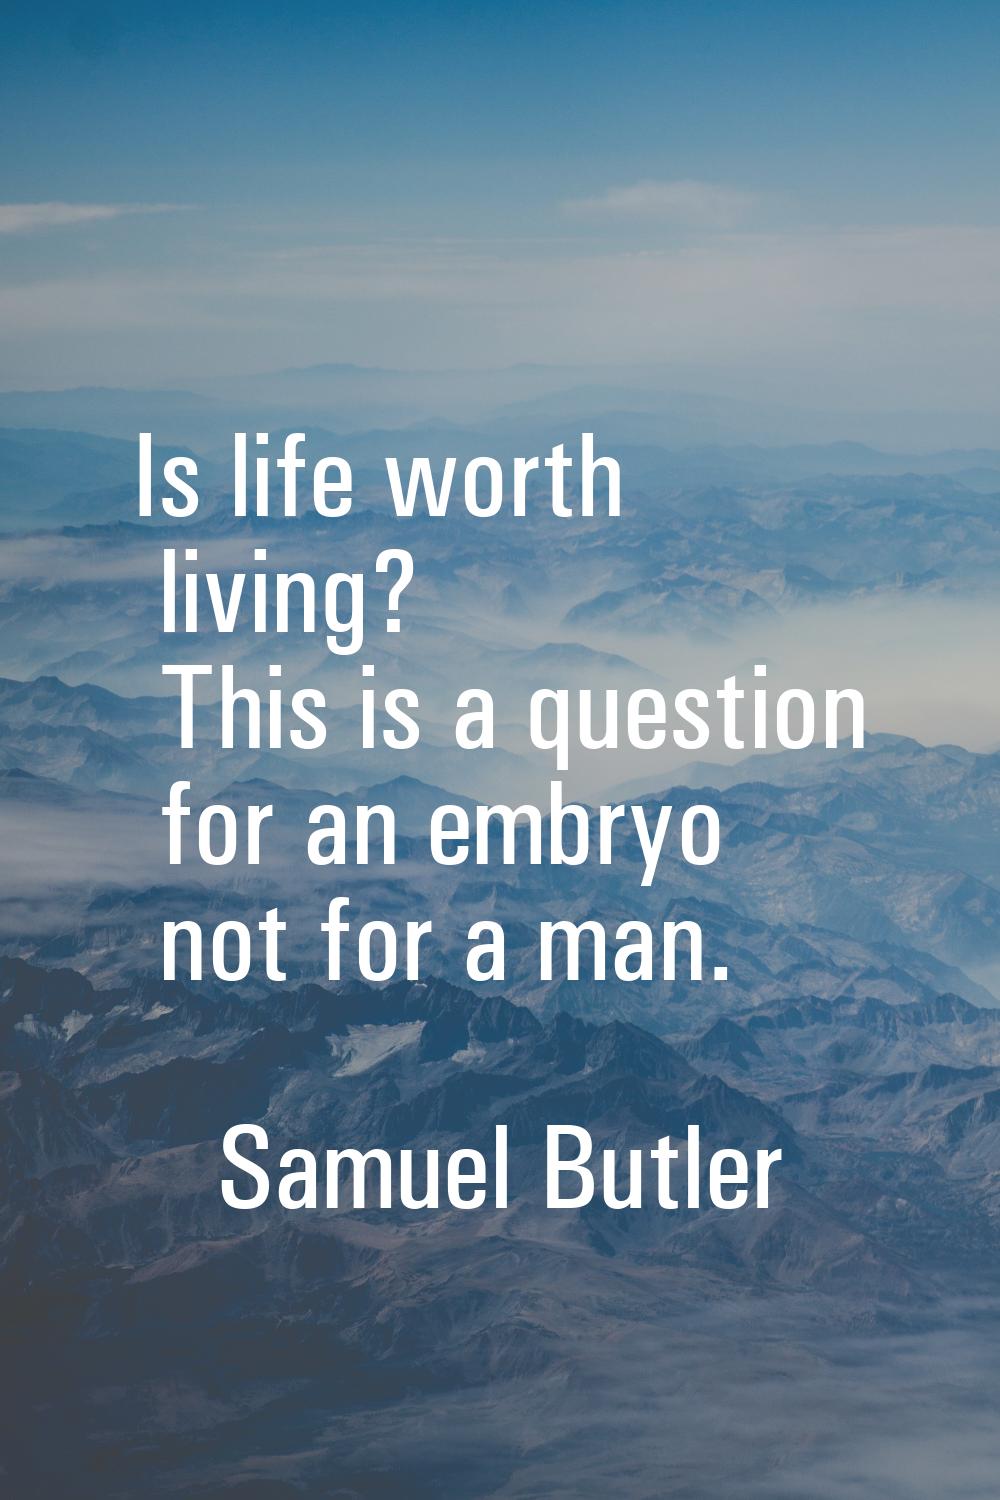 Is life worth living? This is a question for an embryo not for a man.